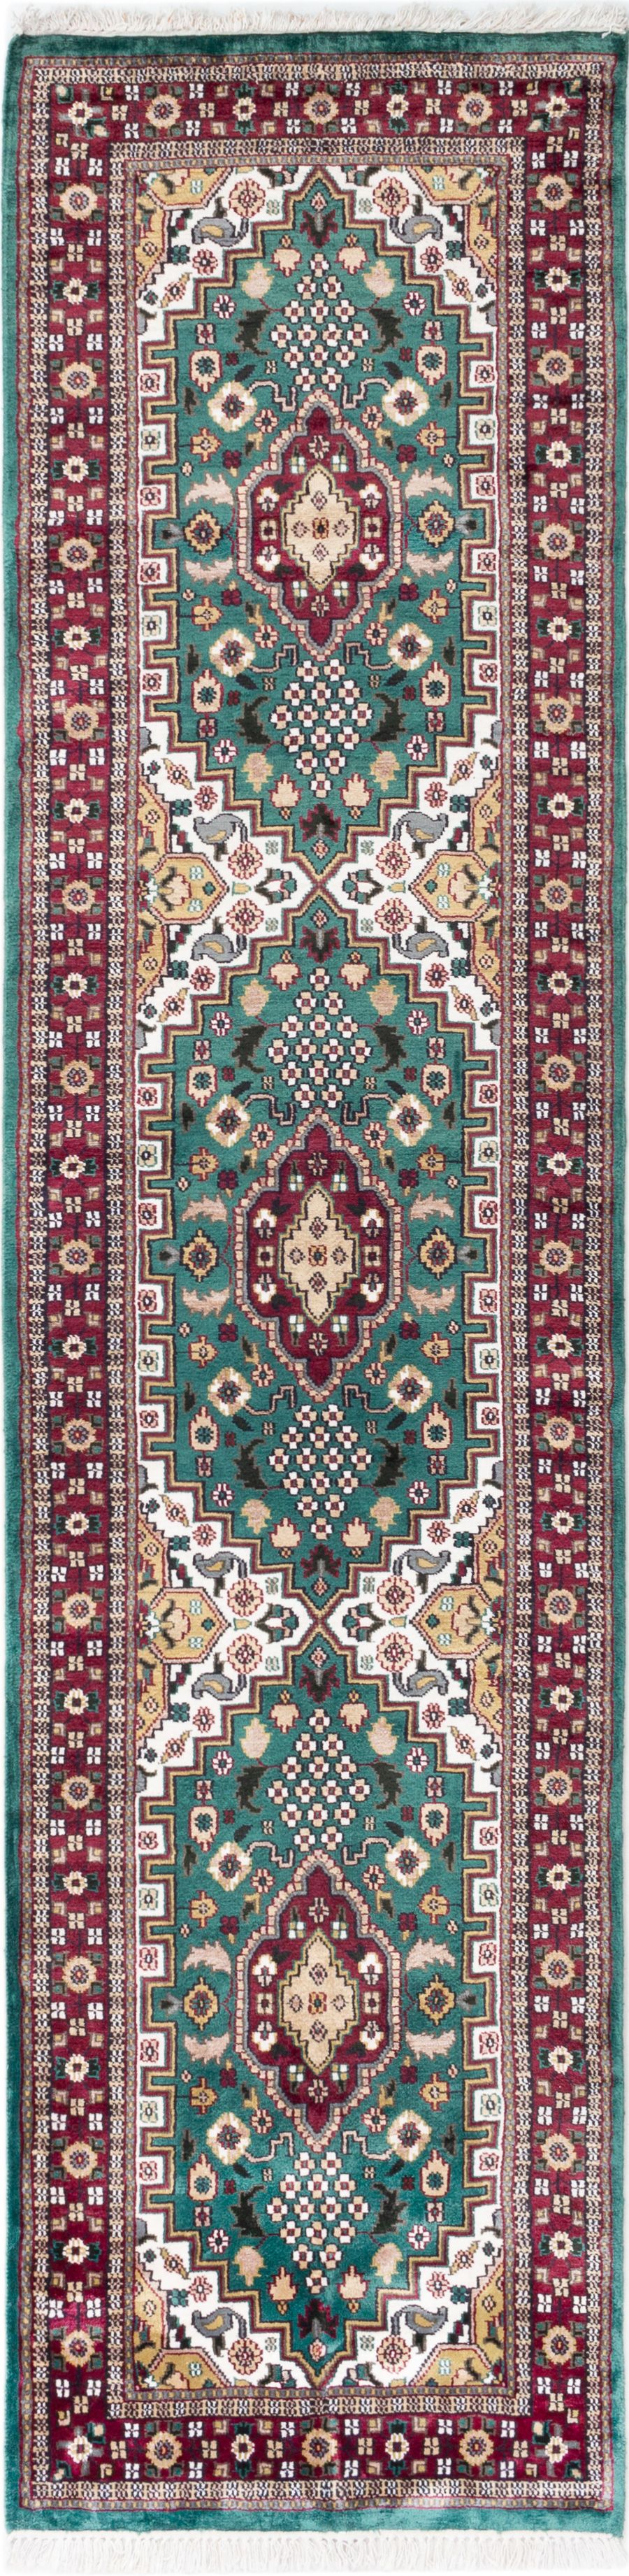 Hand-knotted Kashmir Teal Silk Rug 2'6" x 10'3" Size: 2'6" x 10'3"  